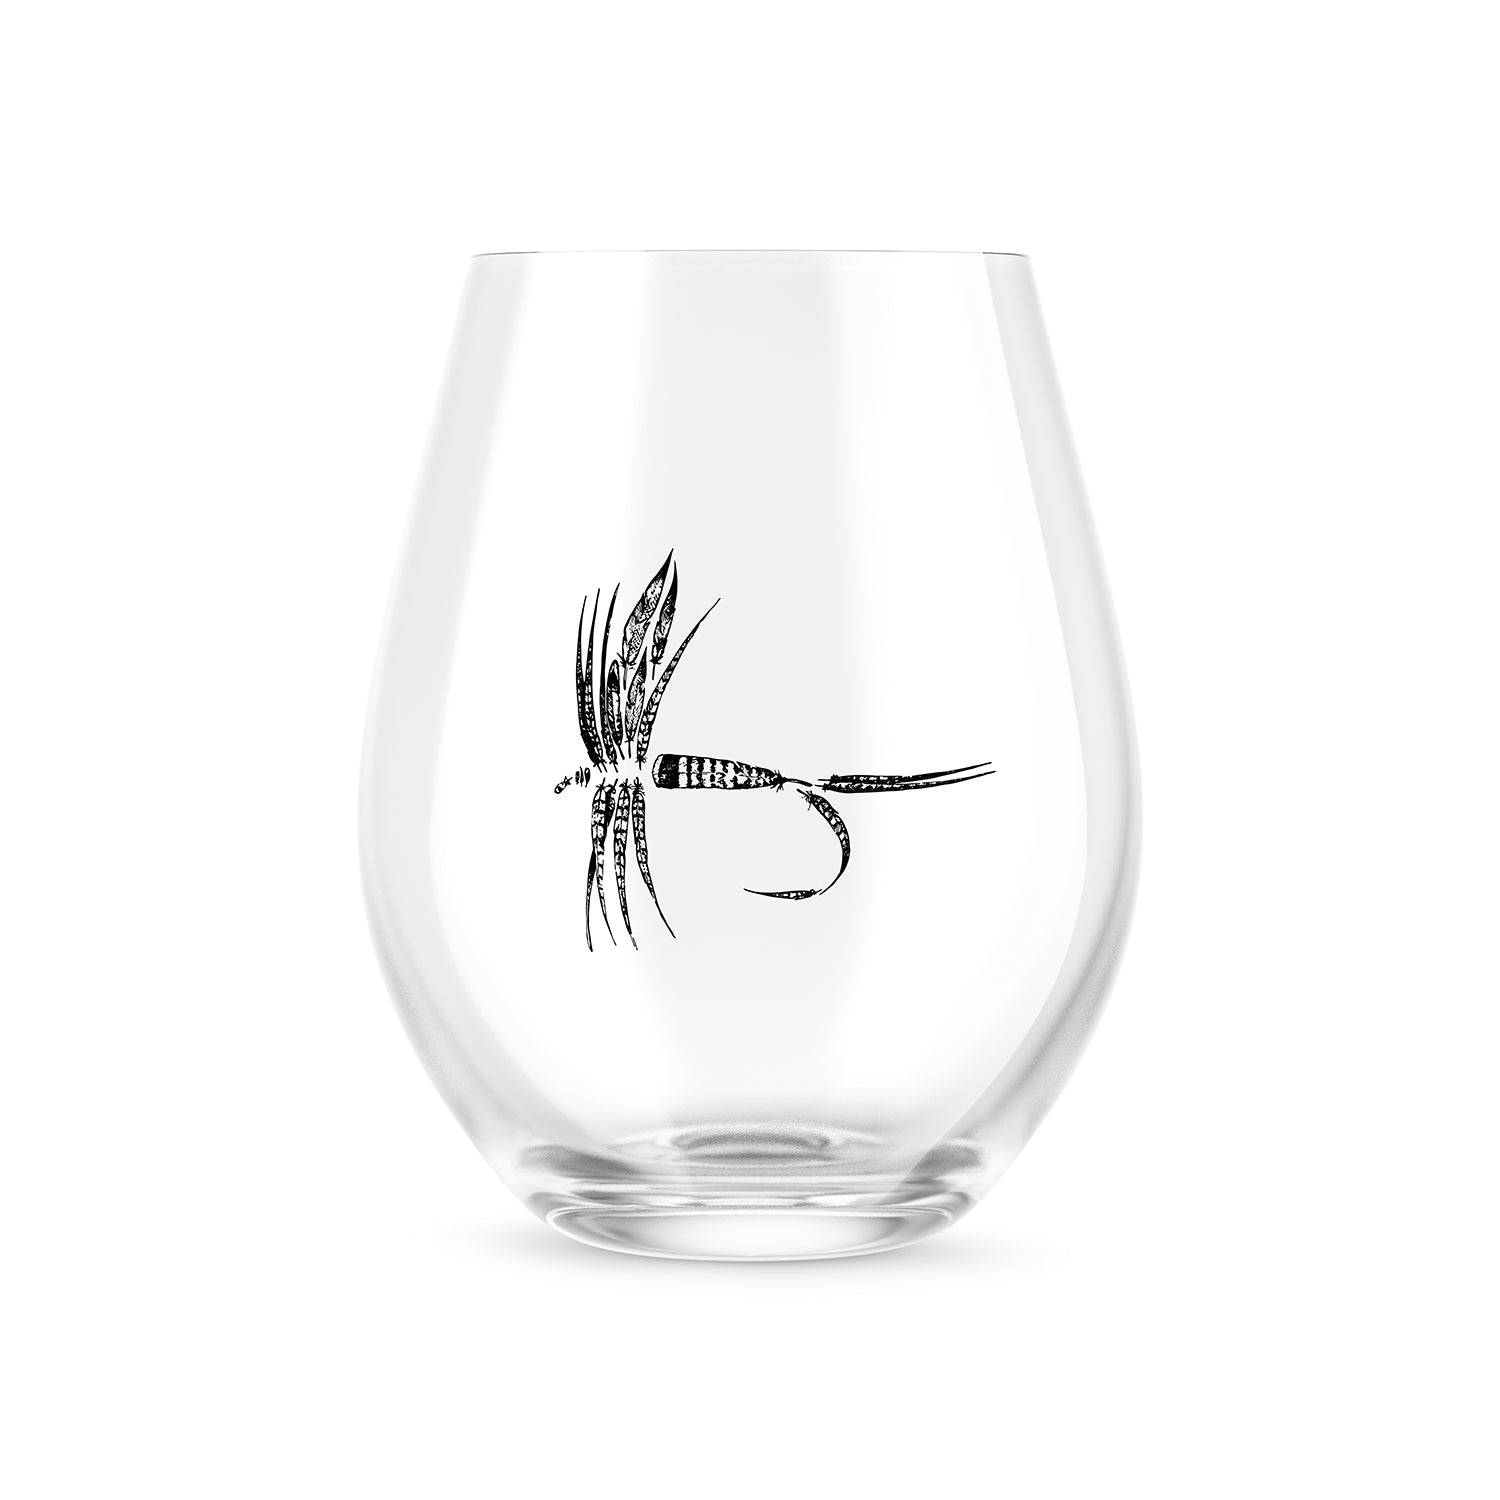 wine glass with a dry fly made up of feathers in black ink